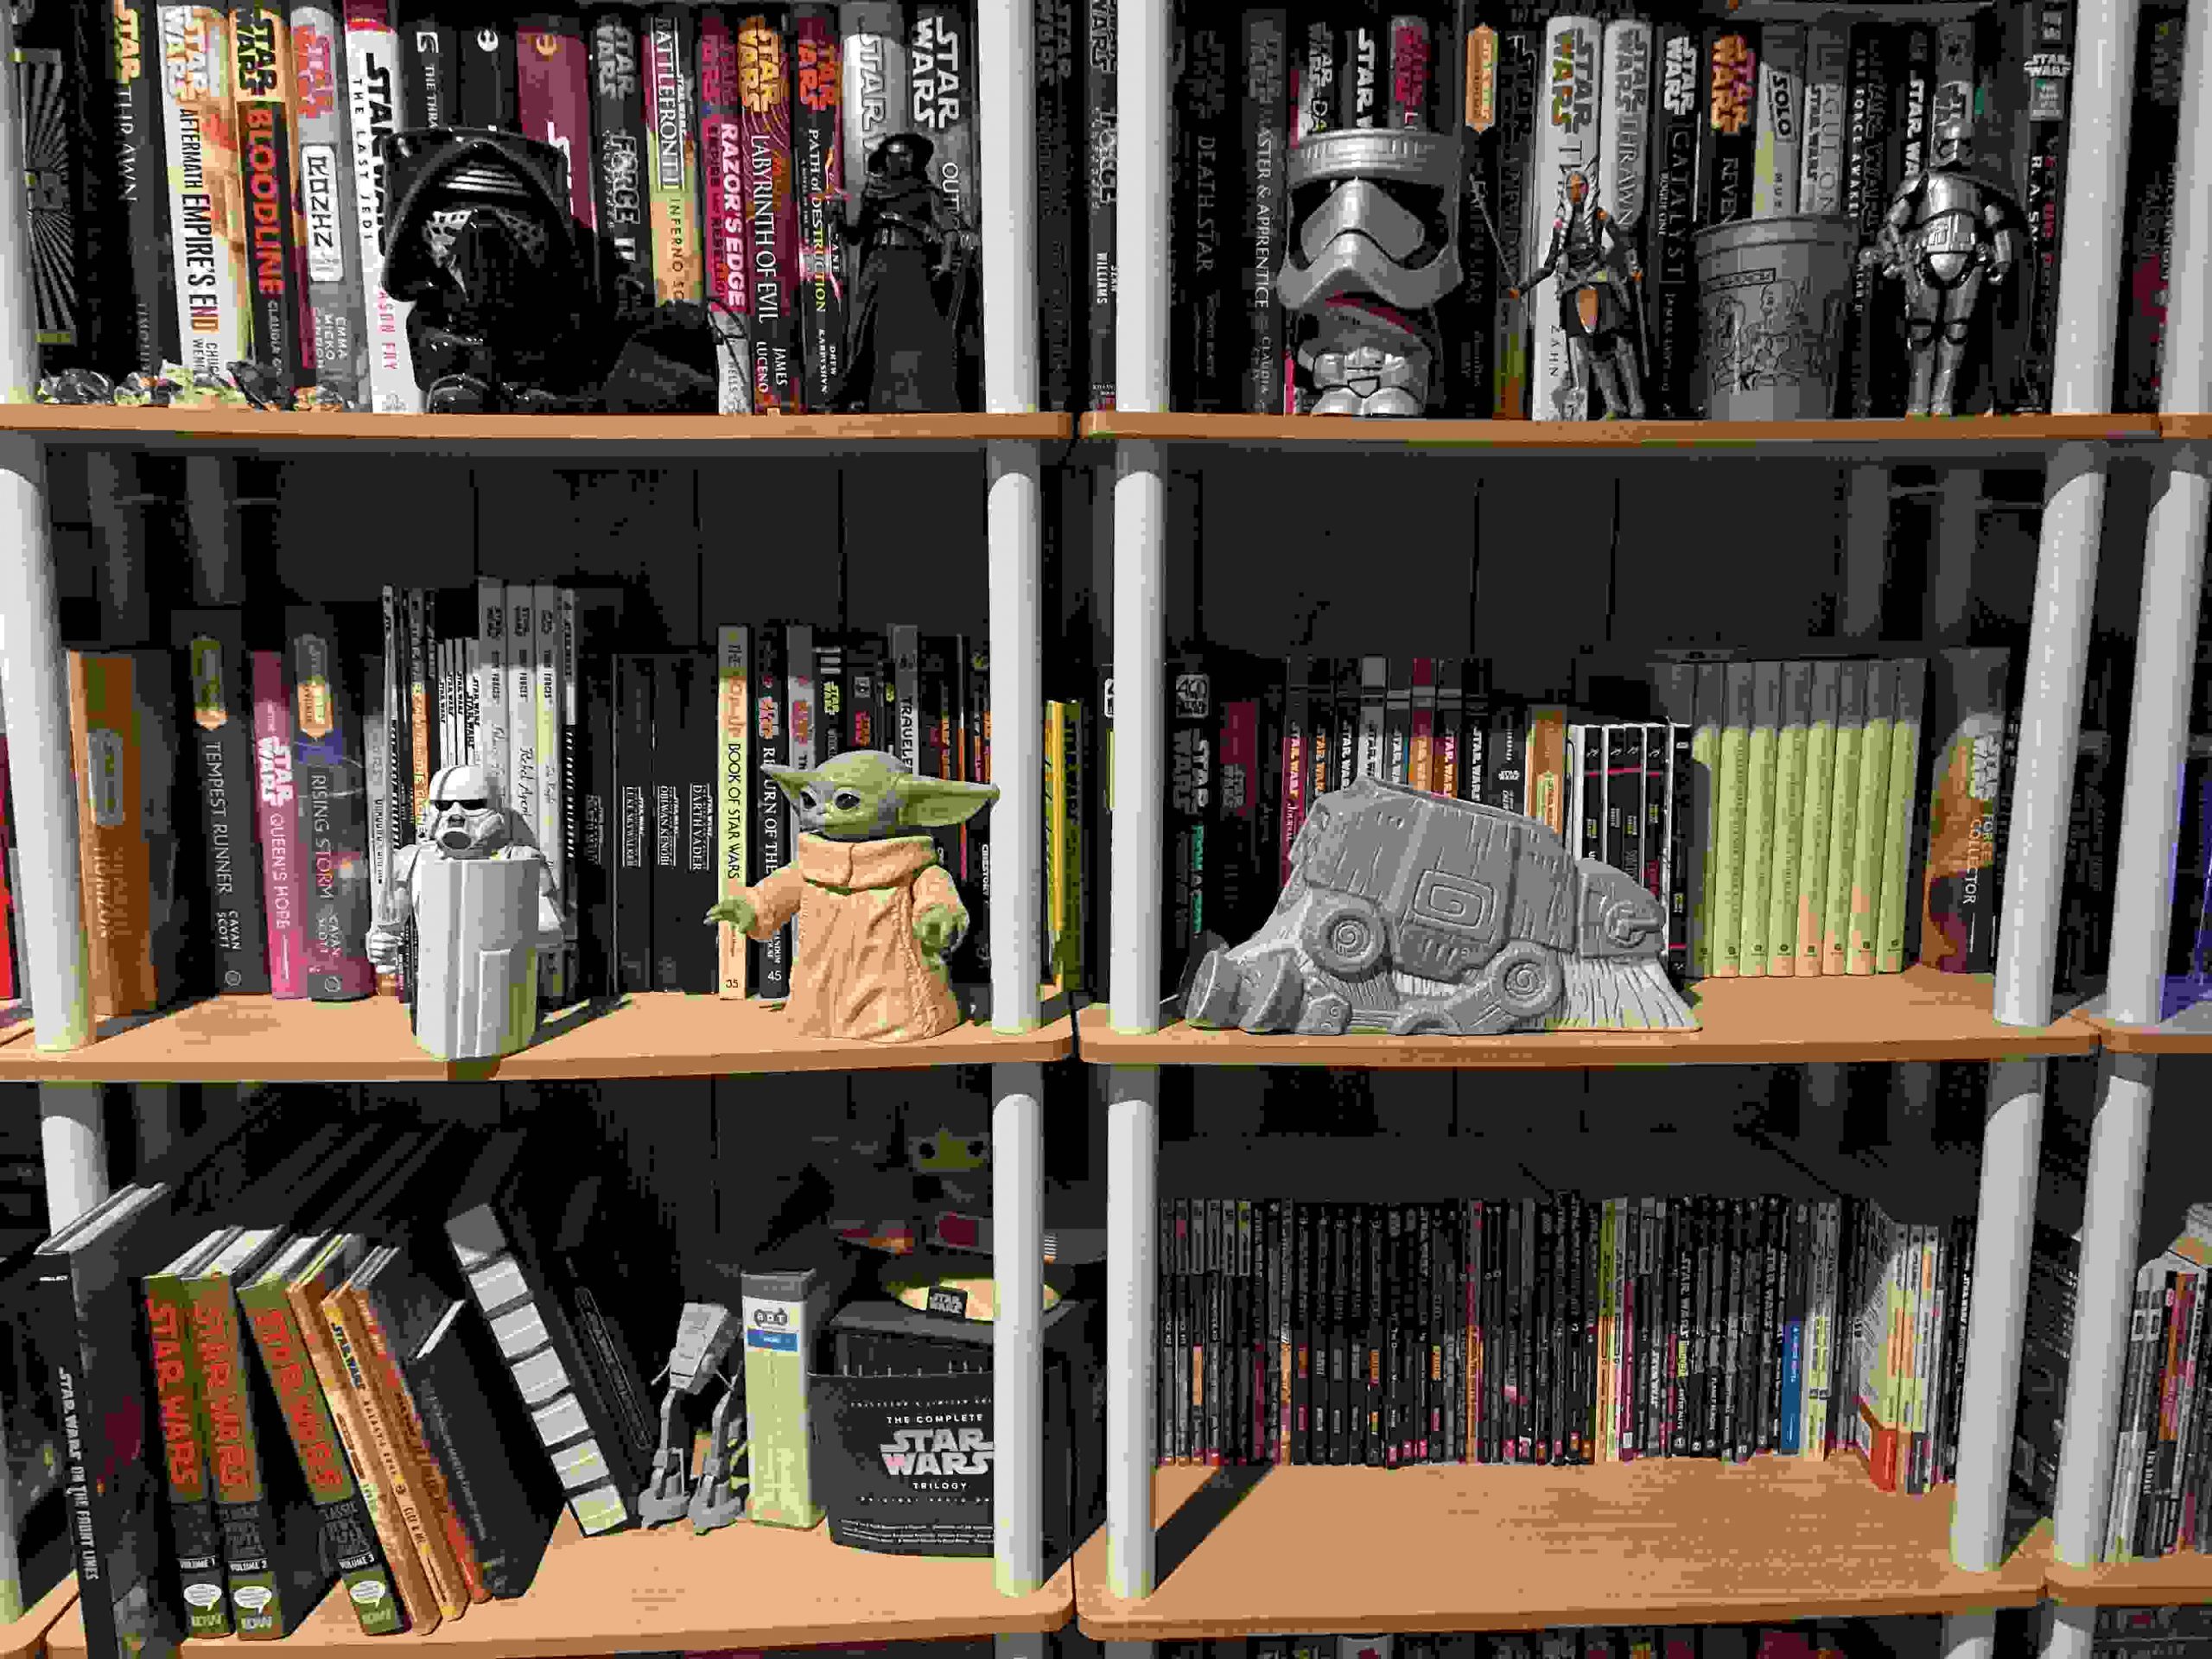 Star Wars novels and toys